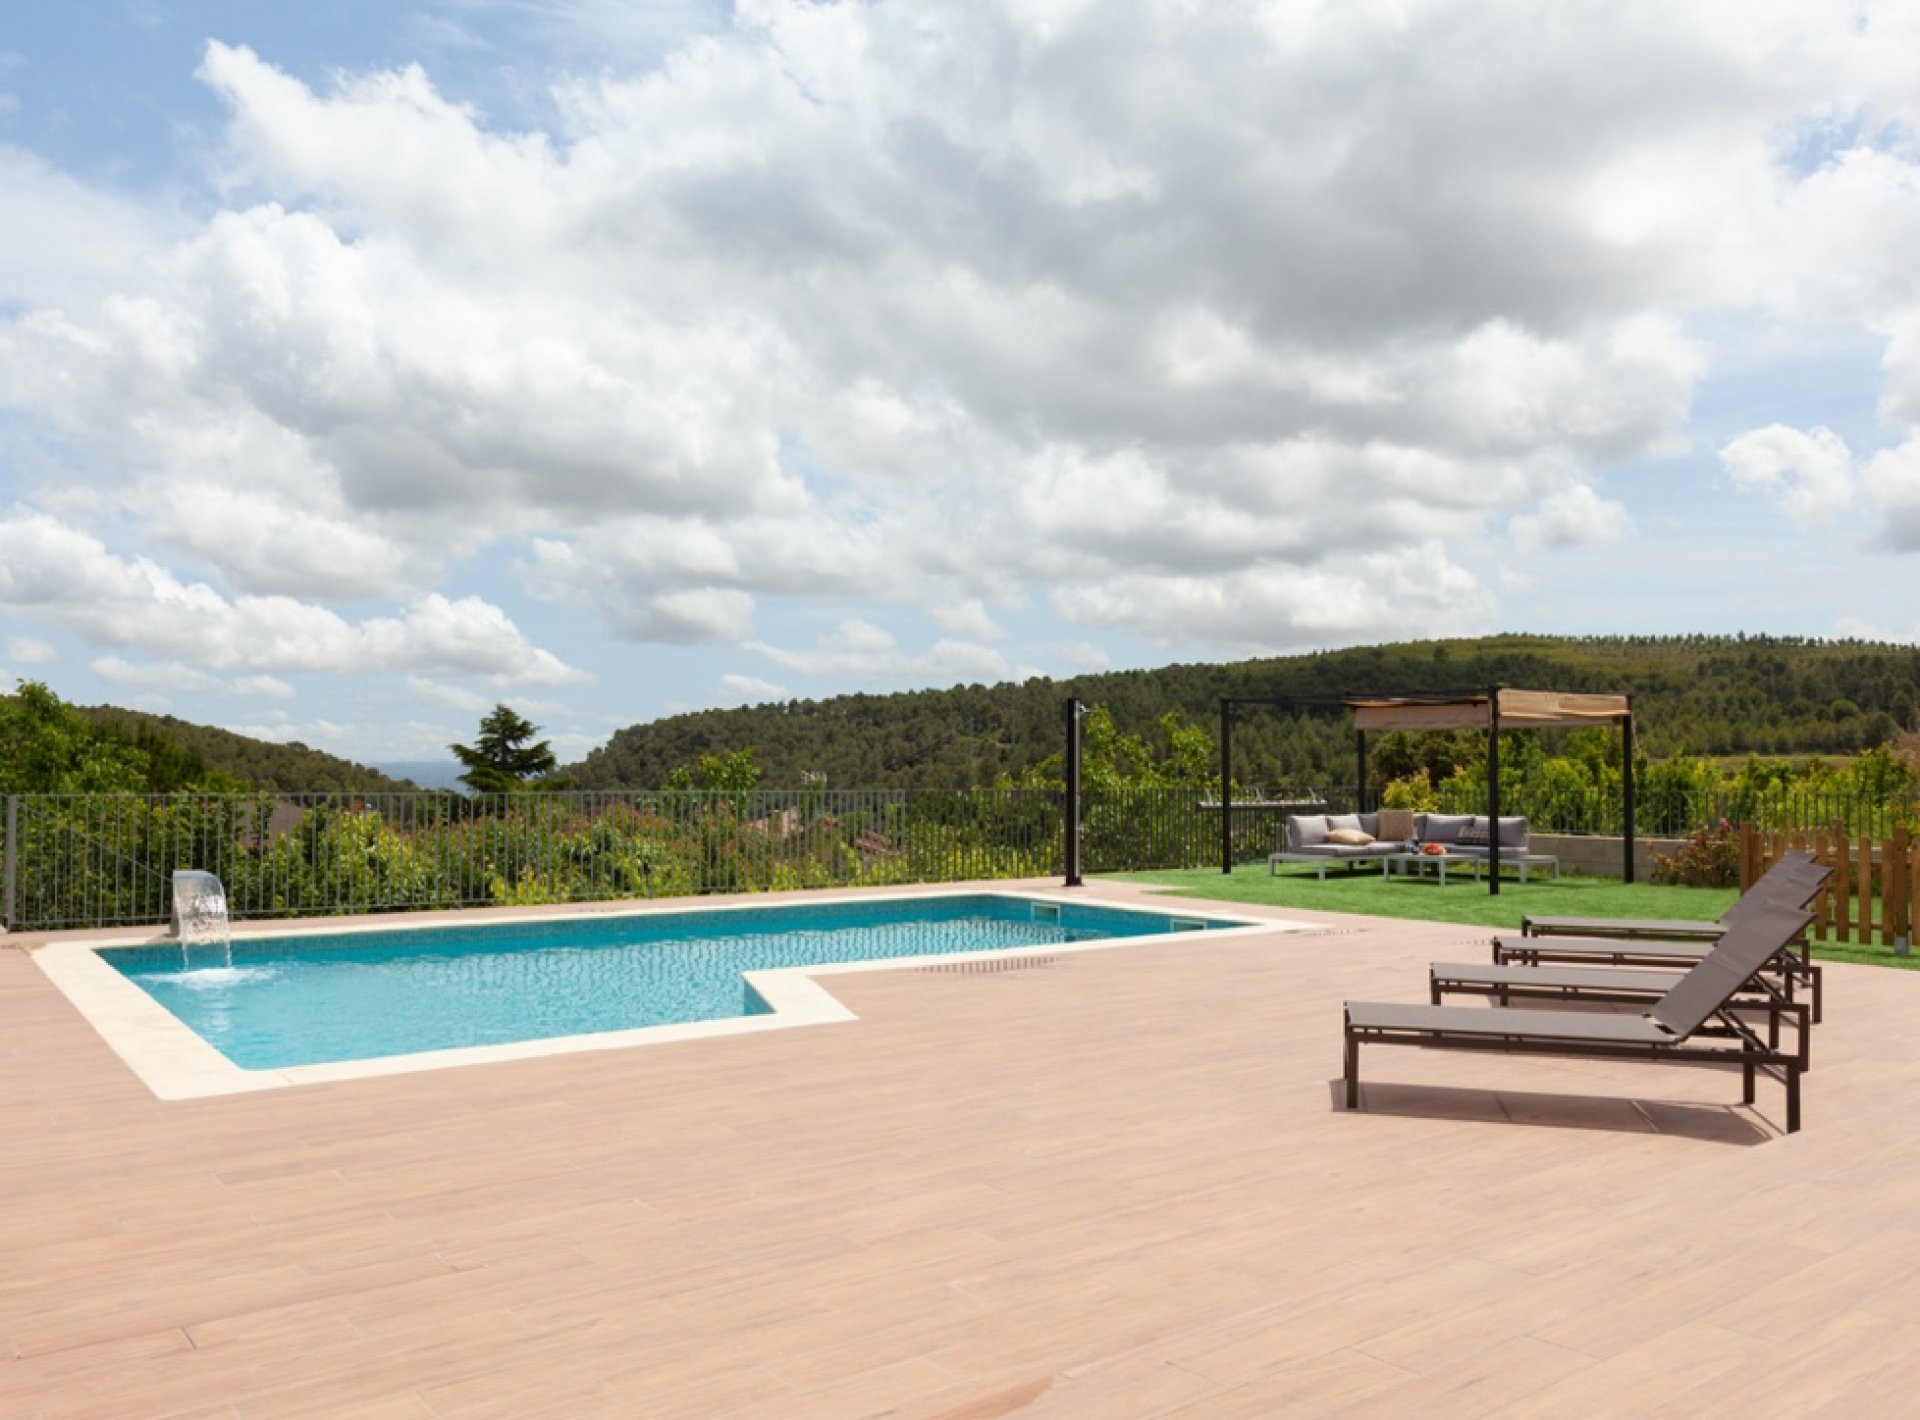 Penedes area, swimming pool